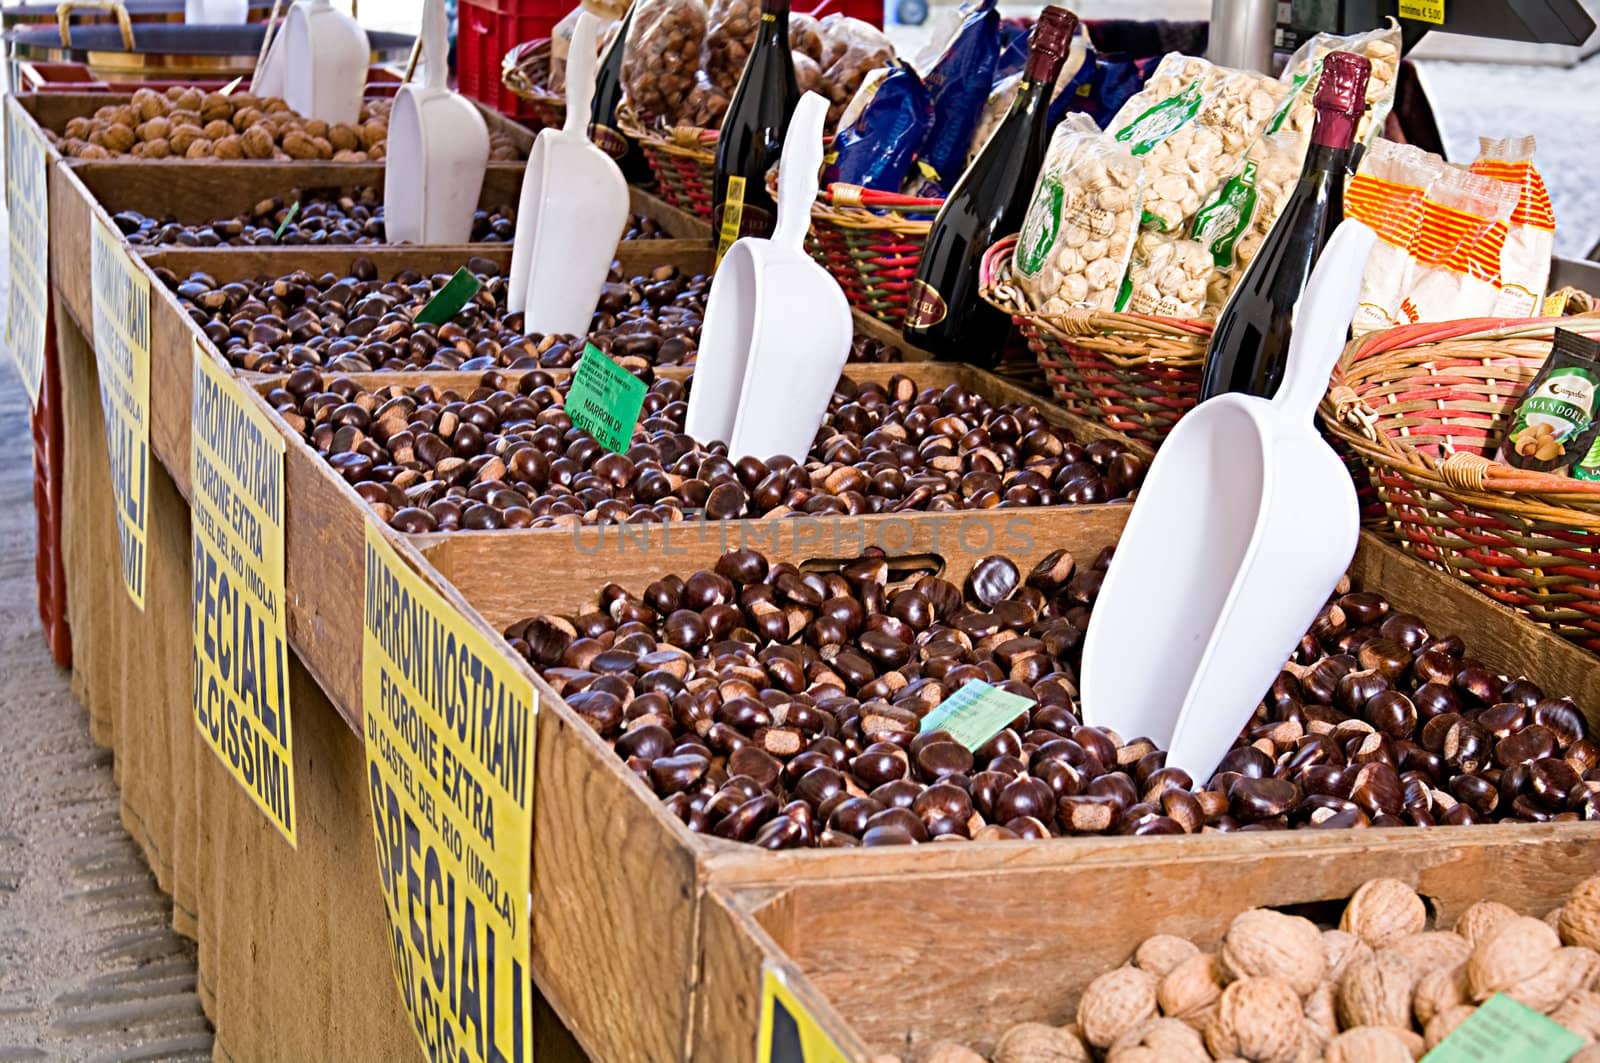 Market stall selling nuts, chesnuts and wine